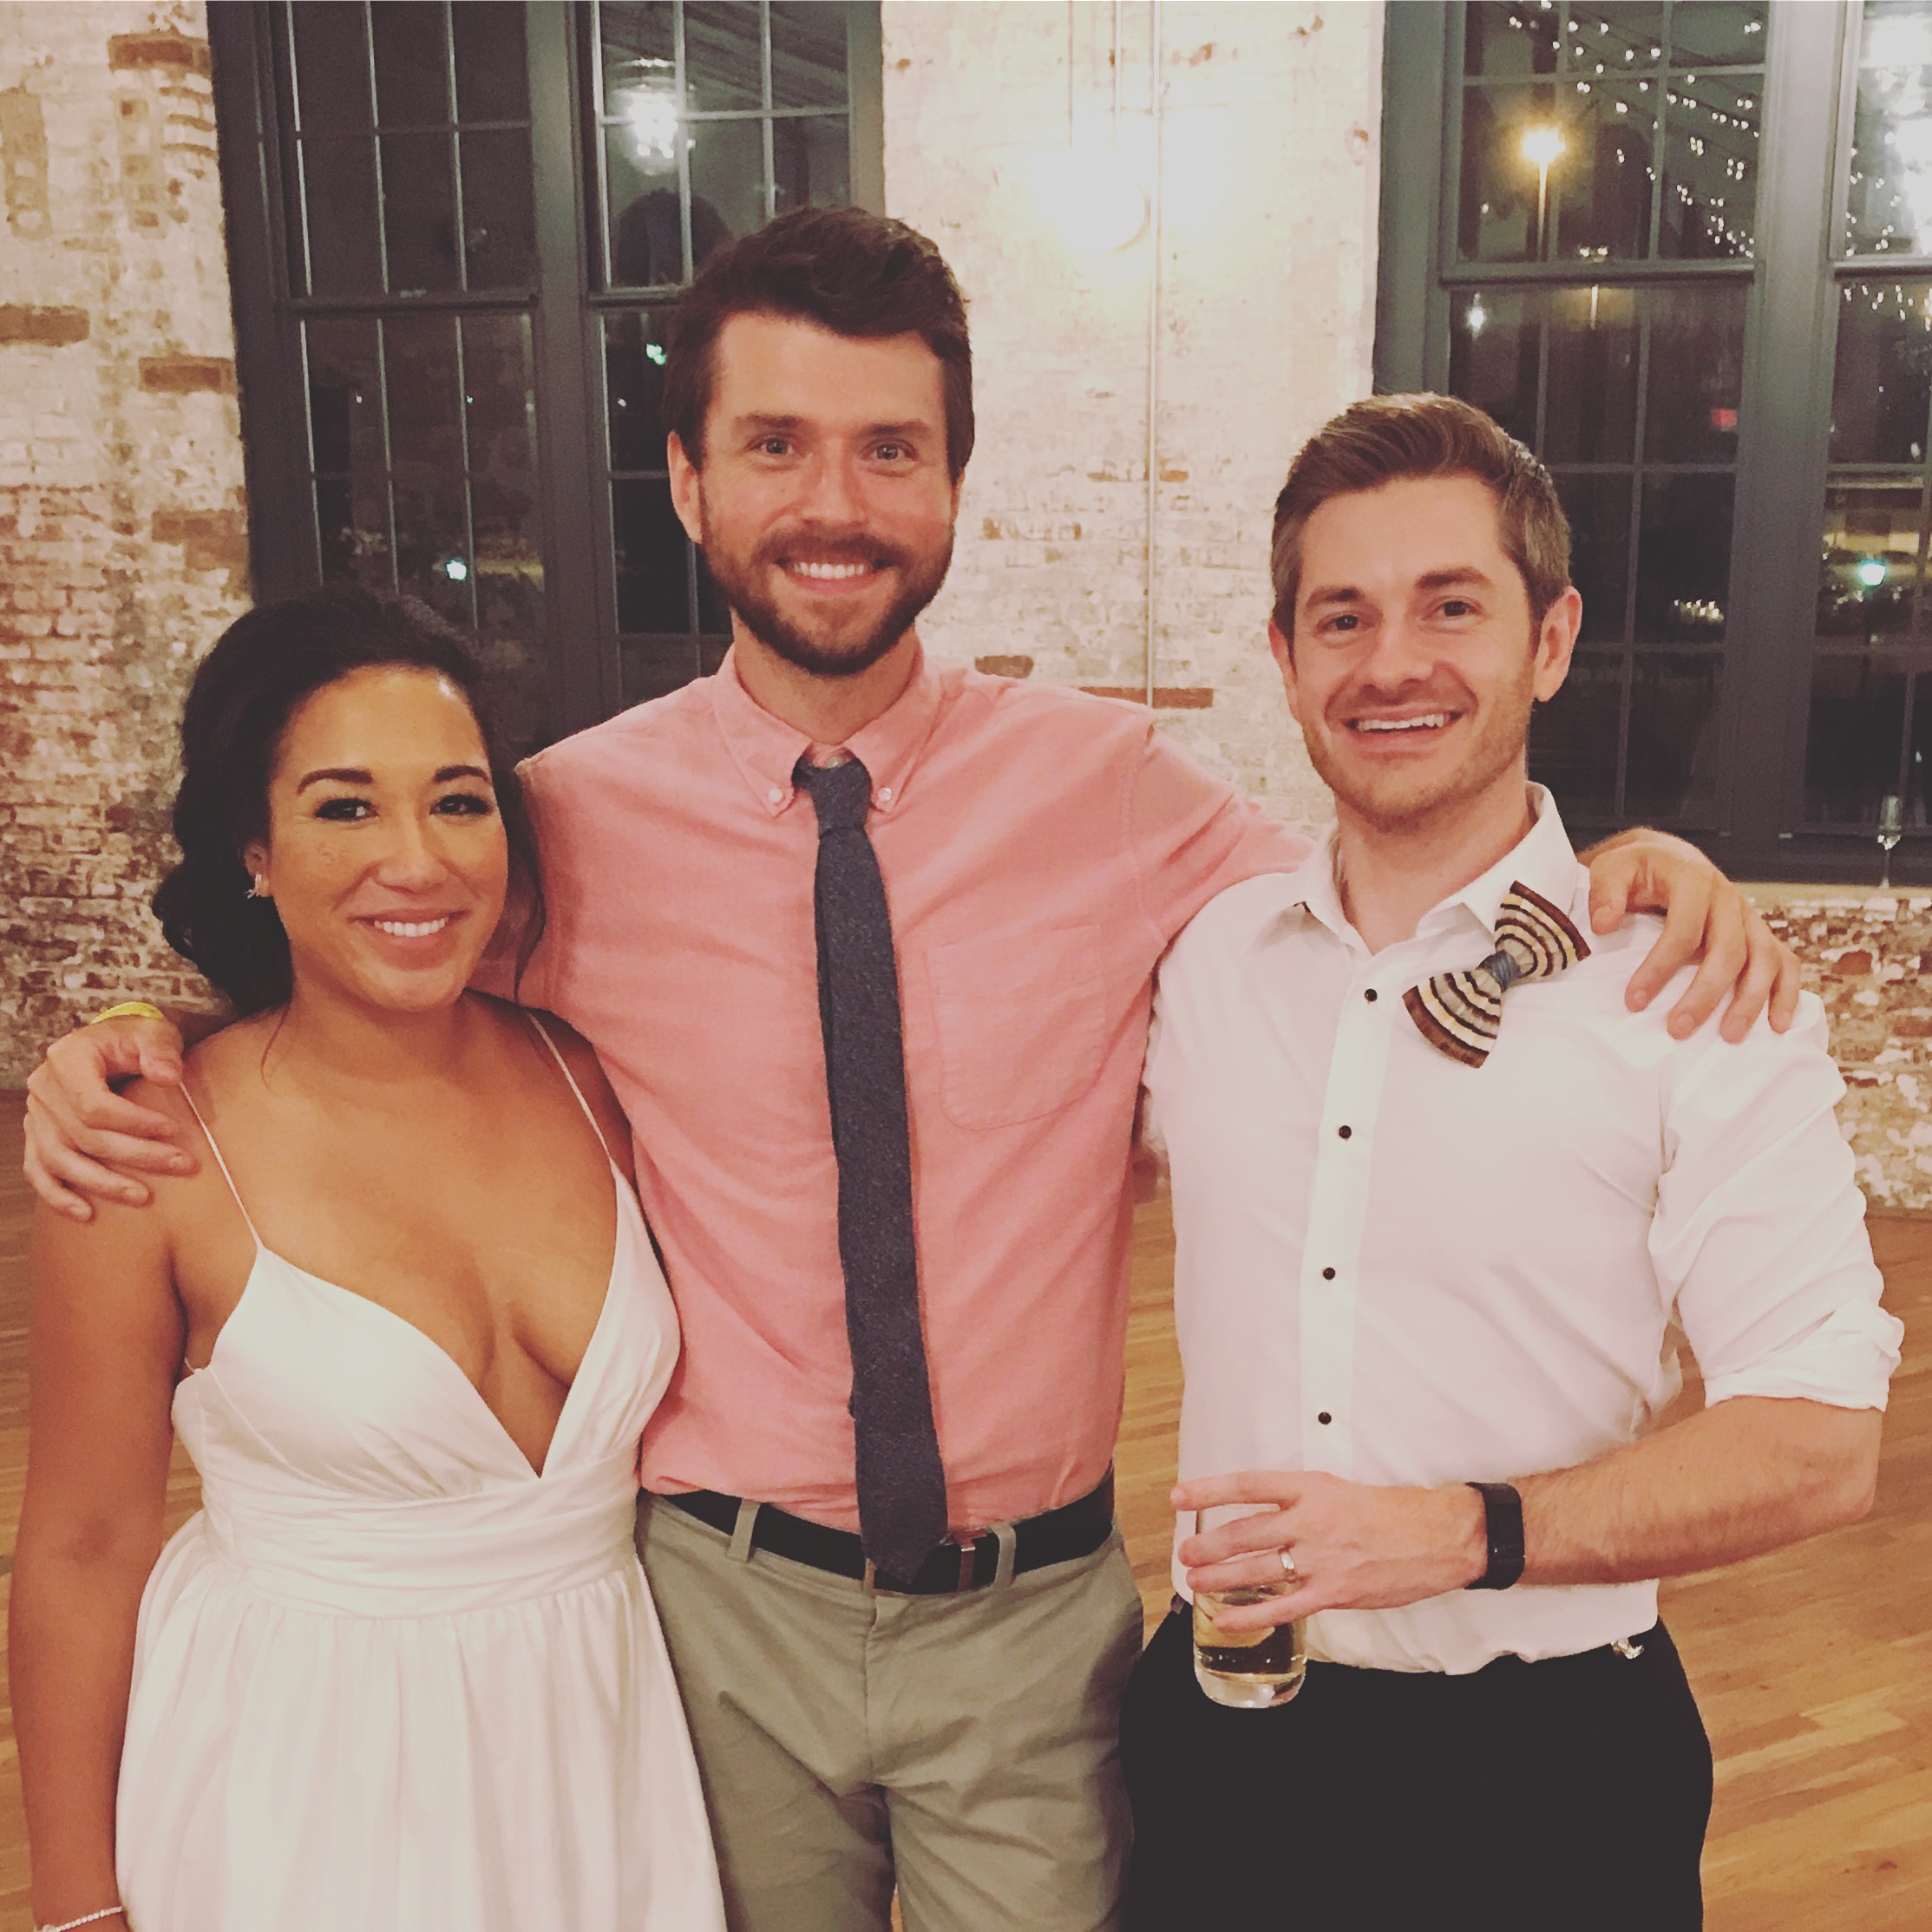 DJ Lucas london hanging out with bride and groom